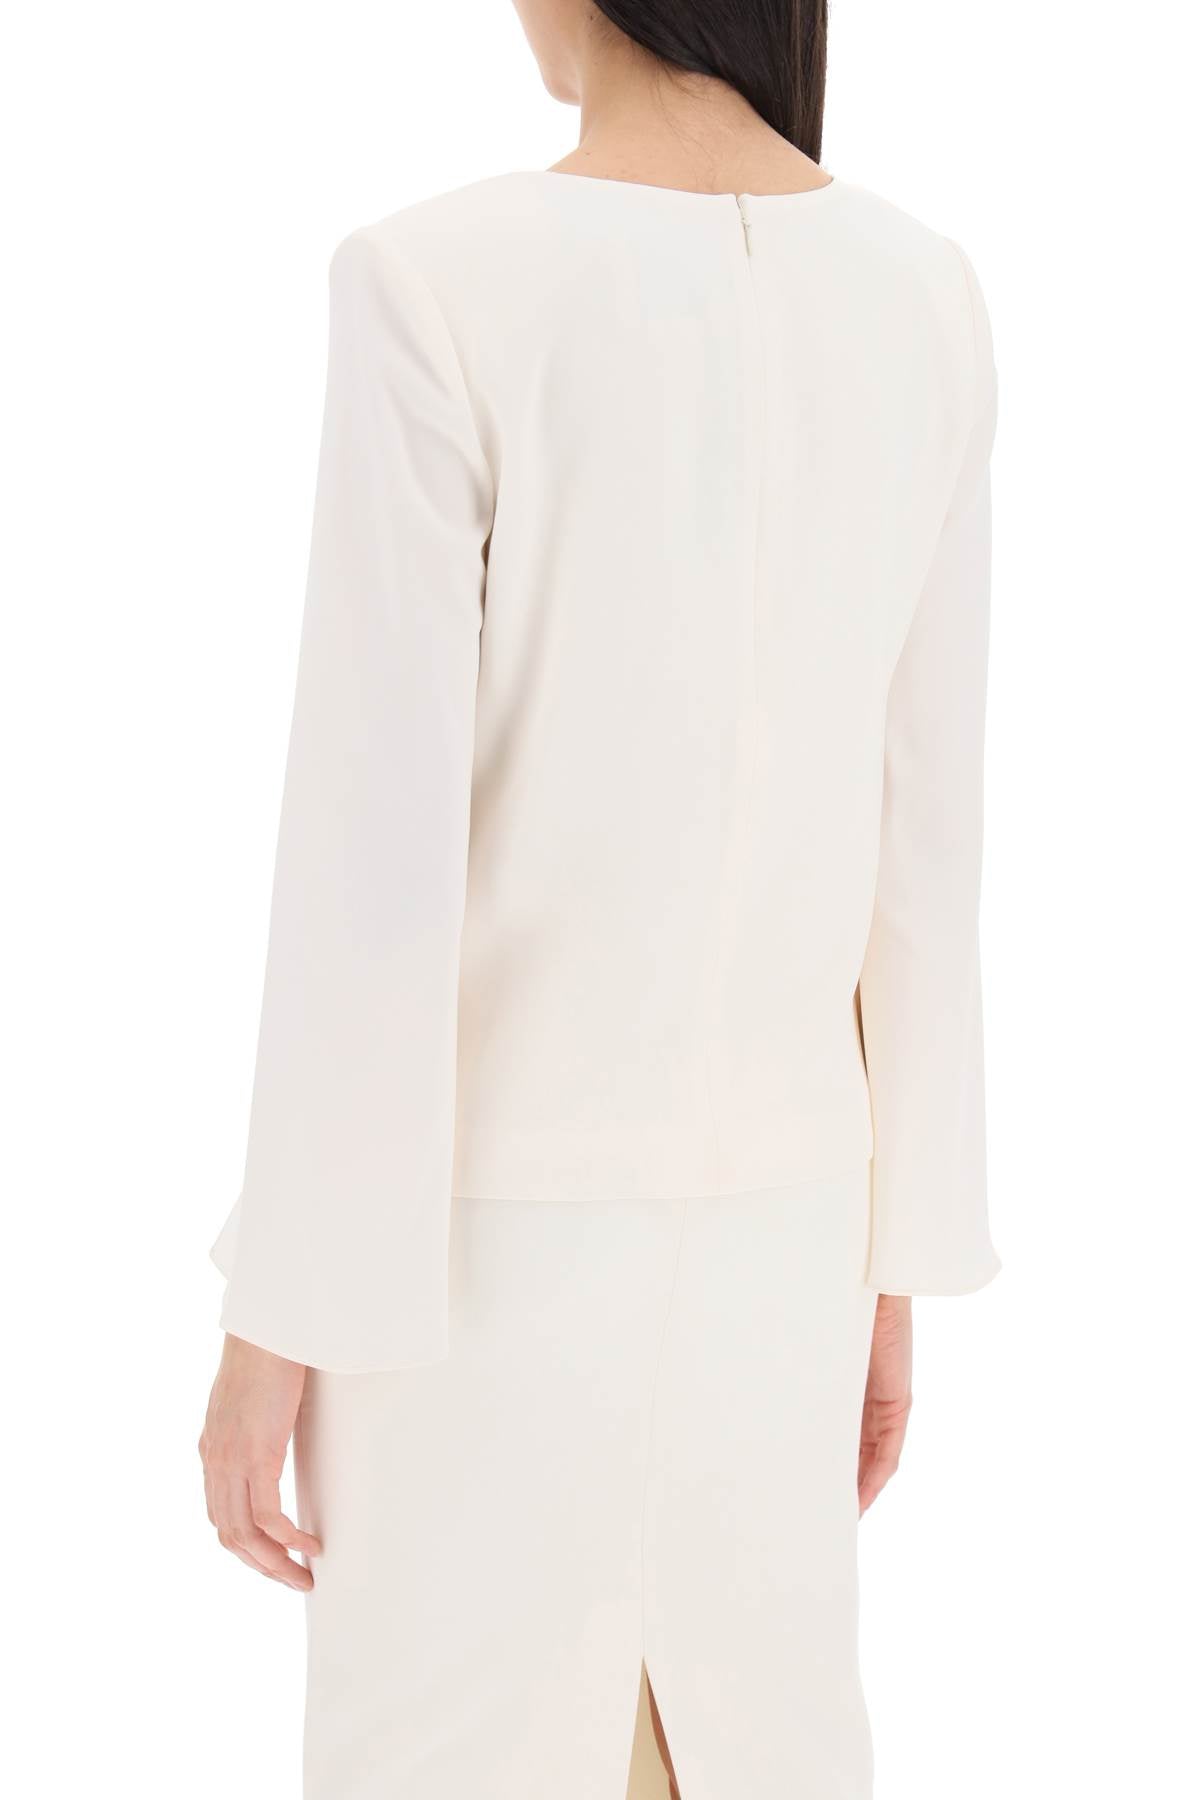 Roland mouret "cady top with flared sleeve"-2